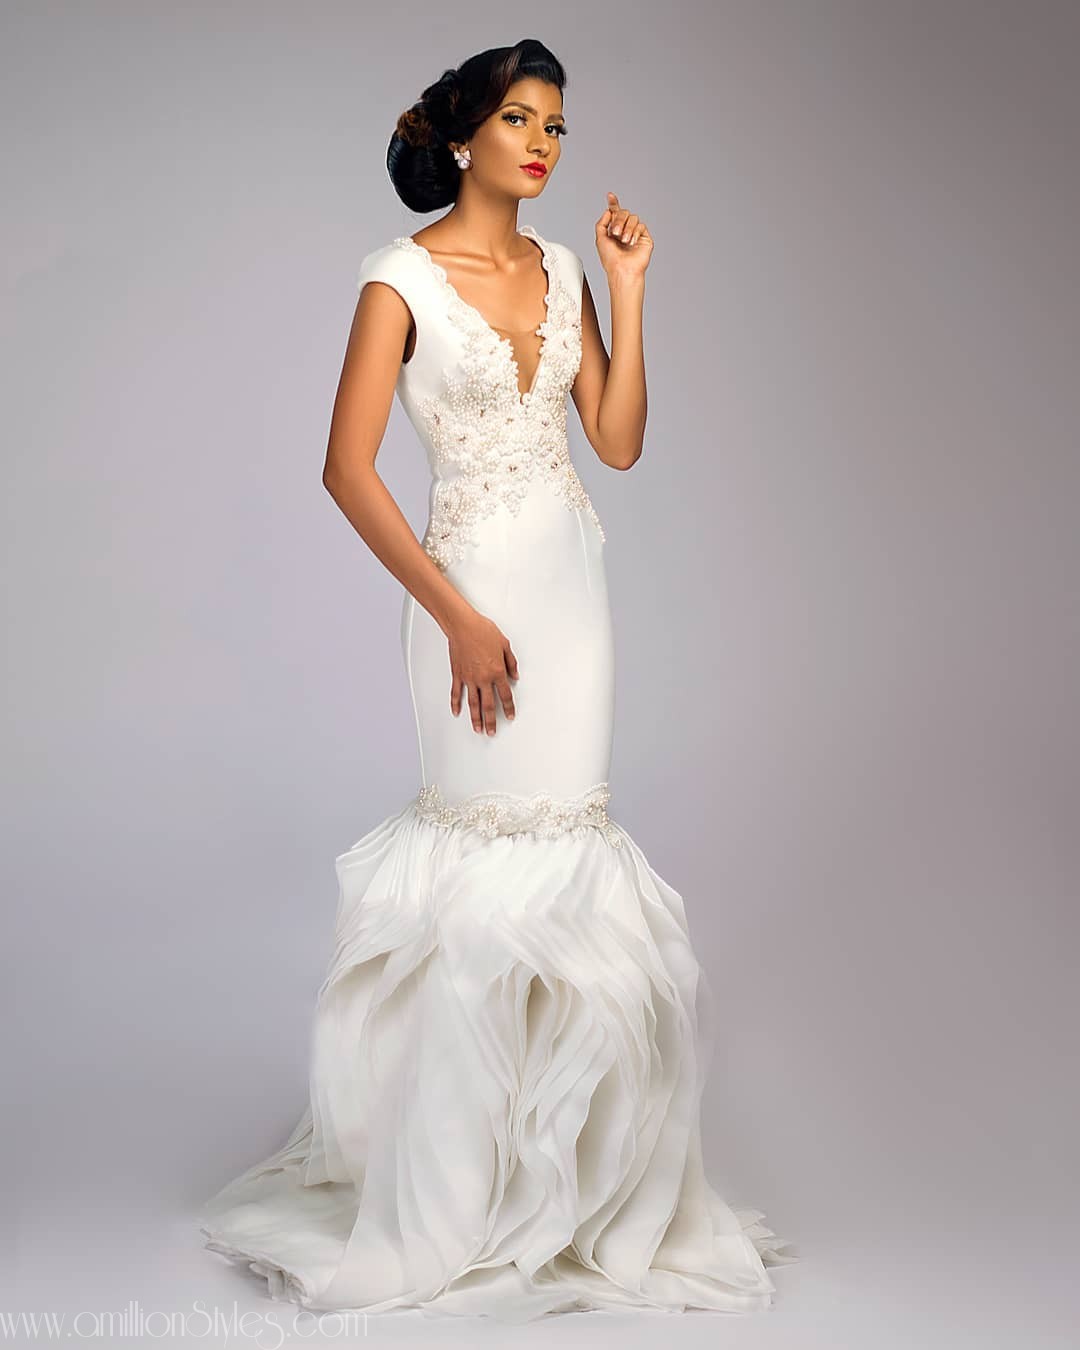 Will You Say Yes To Bibi Lawrence's Bridal Collection?